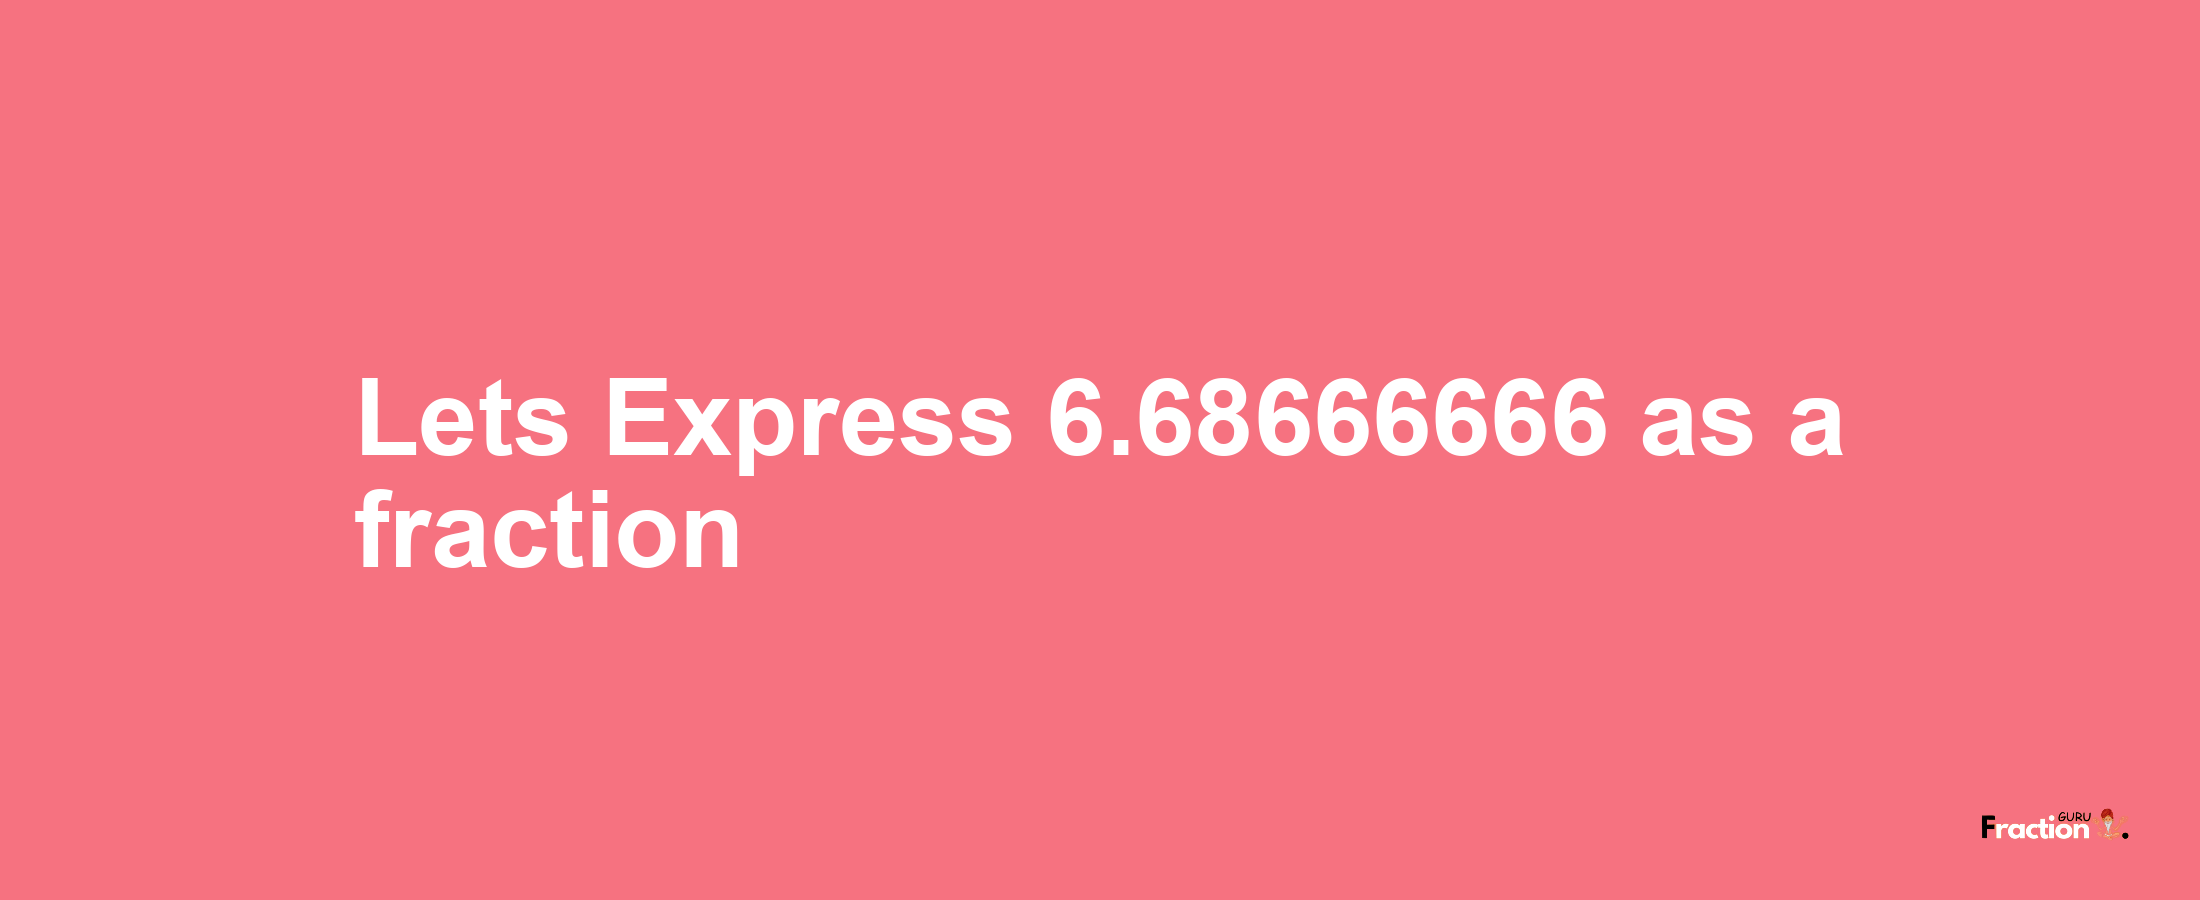 Lets Express 6.68666666 as afraction